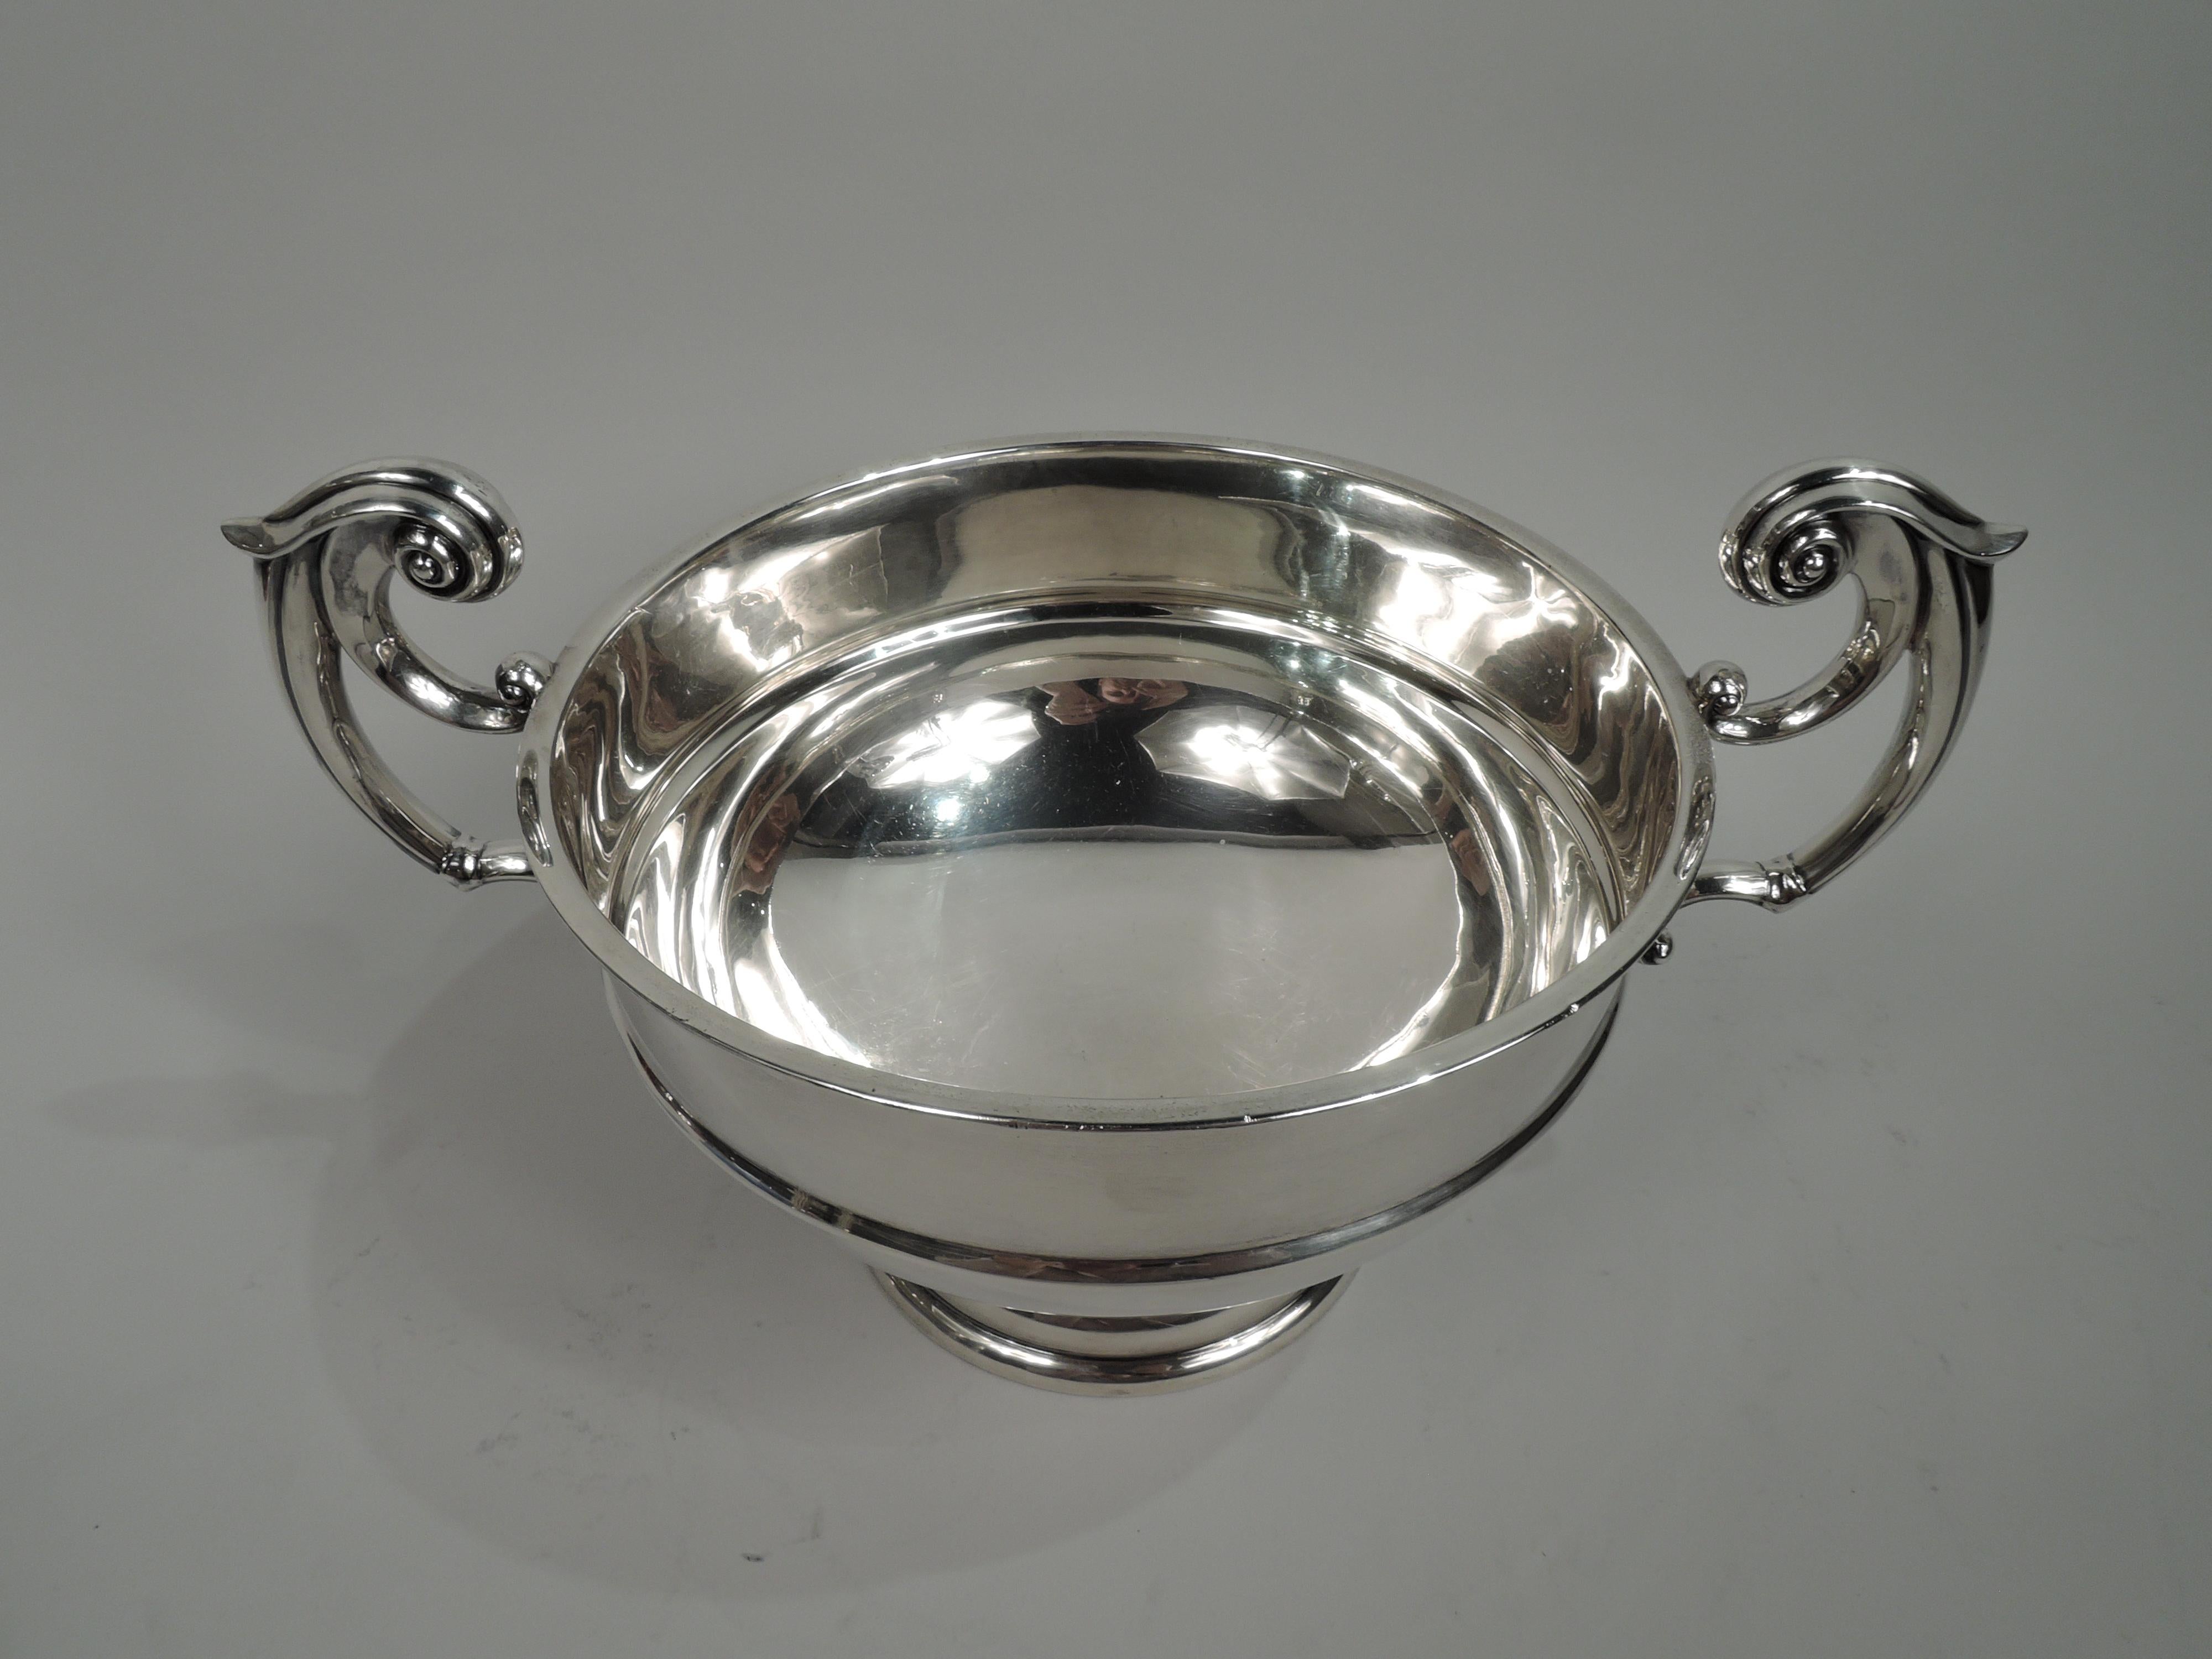 George V sterling silver trophy bowl. Made by John and William Deakin in Sheffield in 1923. Round and girdled with molded rim and curved bottom. Leaf-capped double-scroll flying side handles and domed foot. Traditional Neoclassicism with lots of